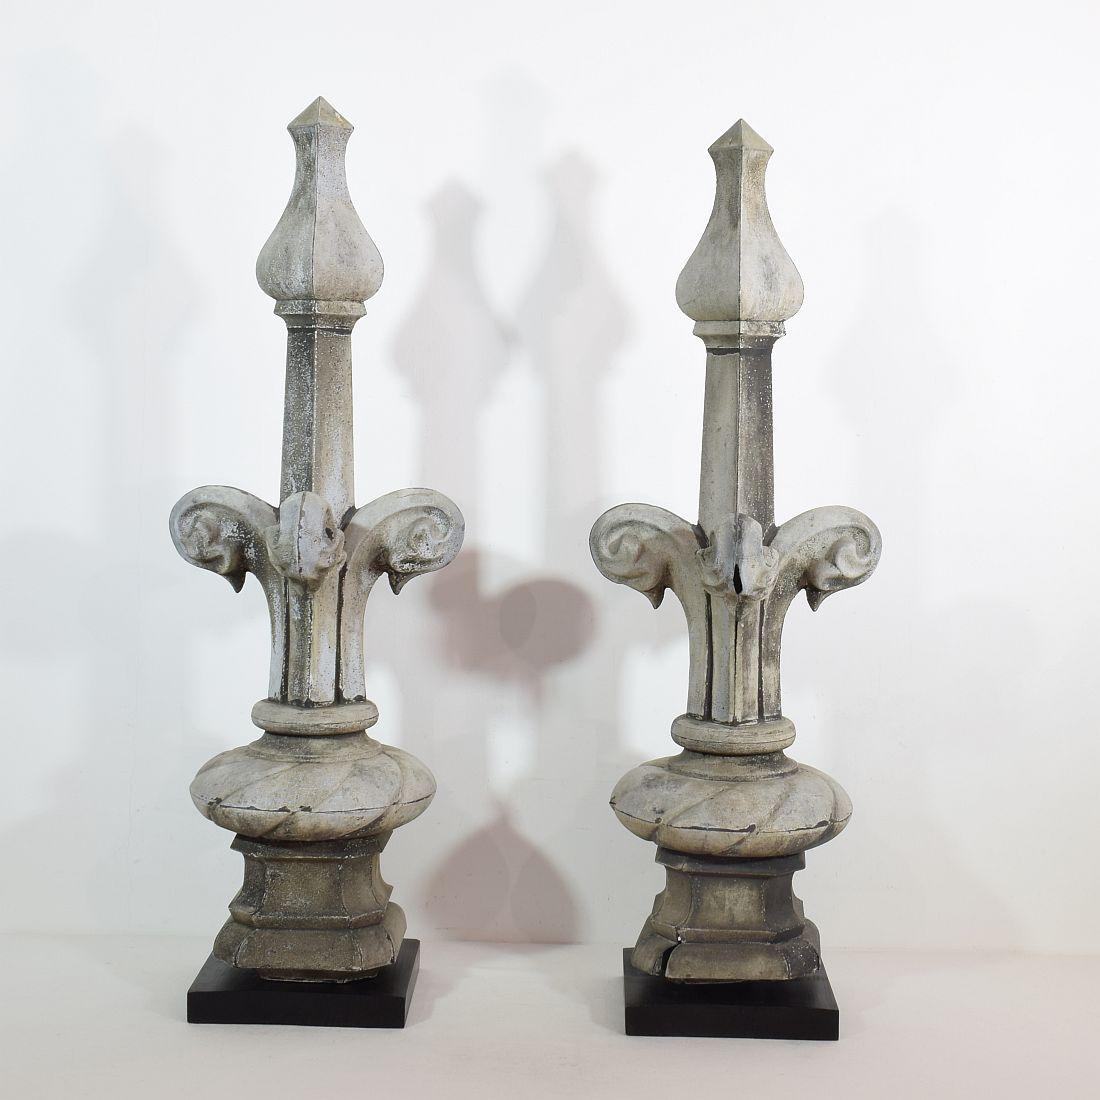 Gothic Revival Pair of 19th Century French Zinc Roof Finials